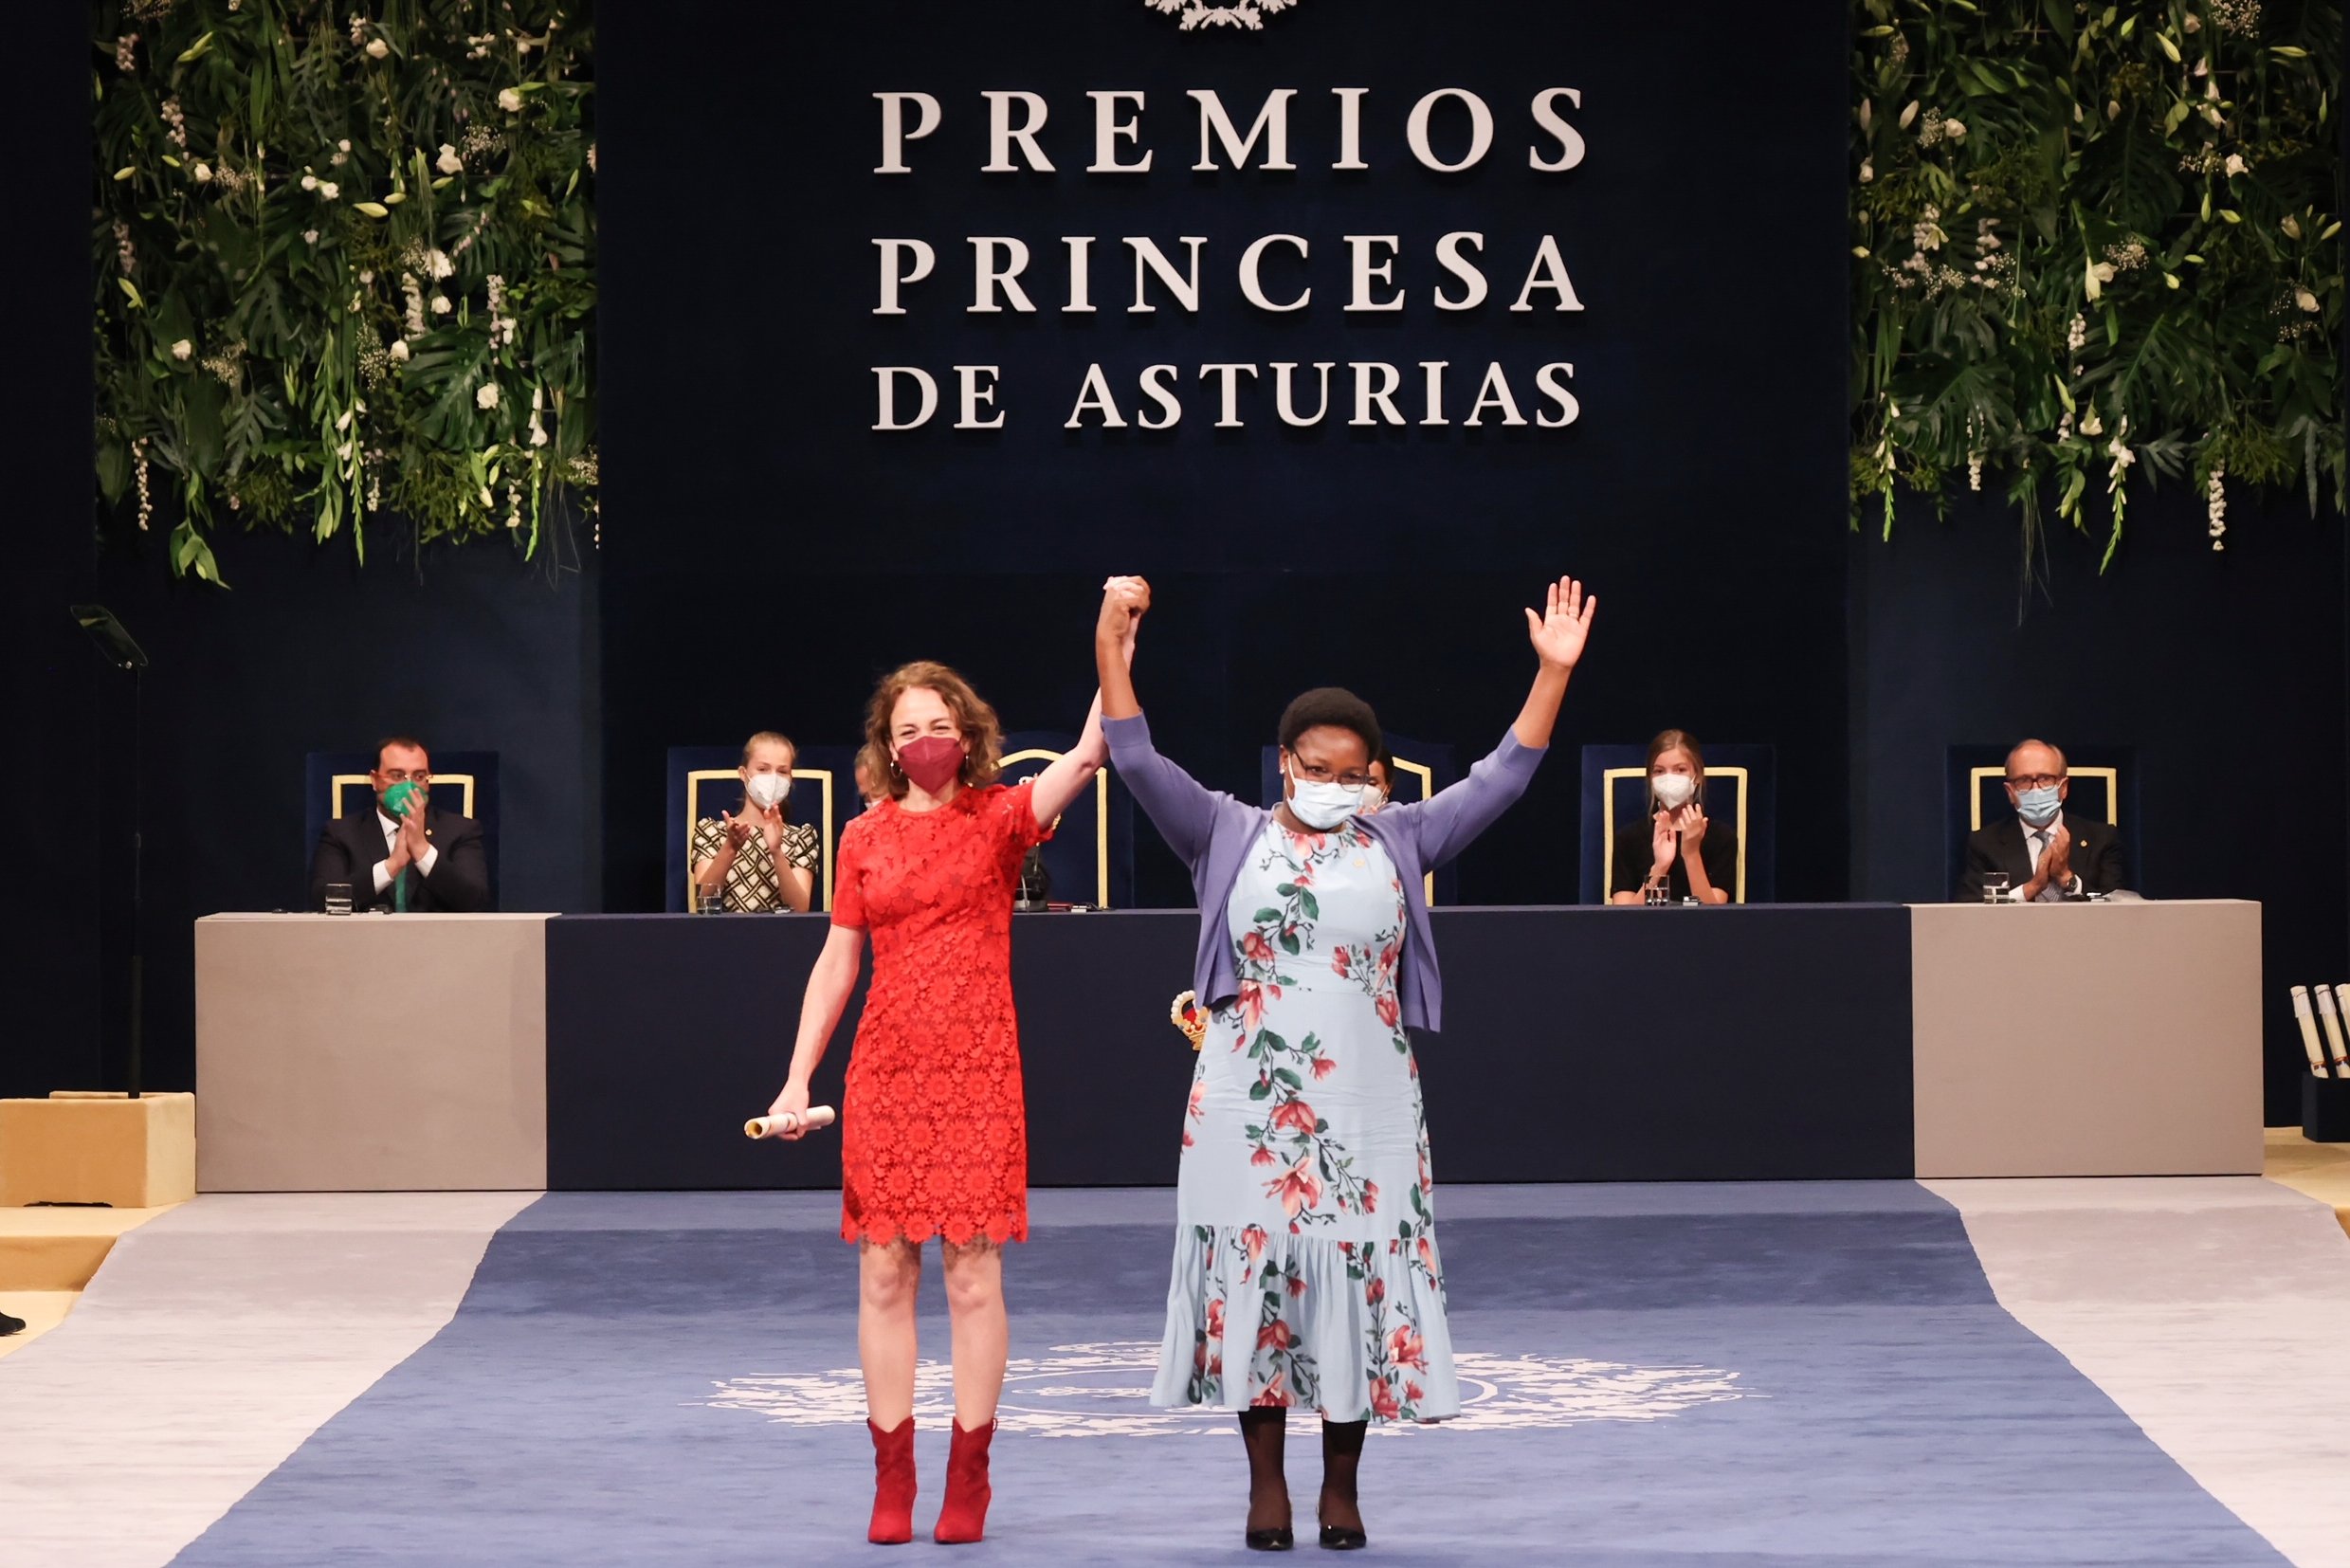 The Princess Asturias Awards 2021: A moment for all in our movement